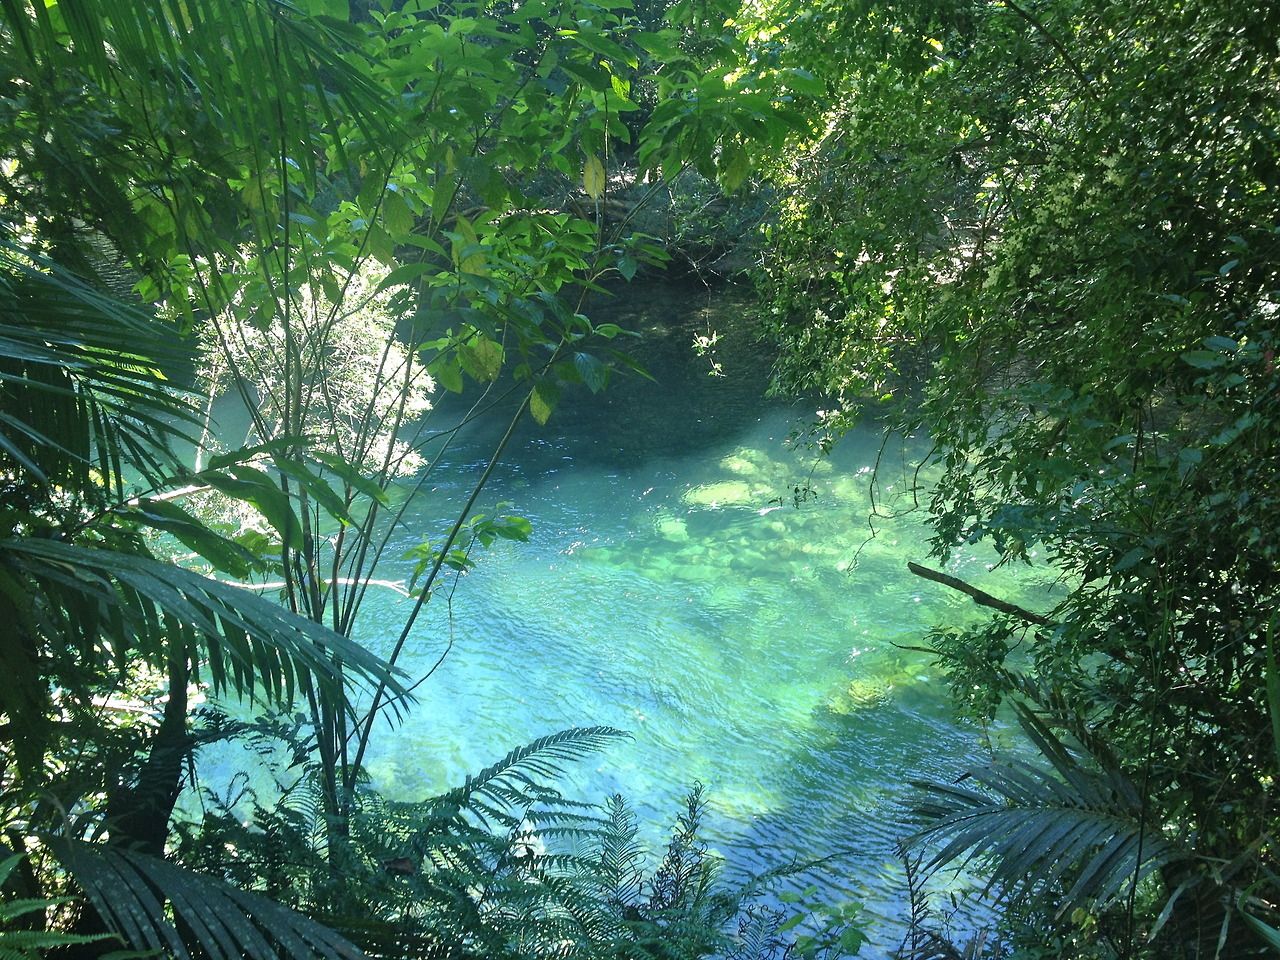 A body of water surrounded by trees - Jungle